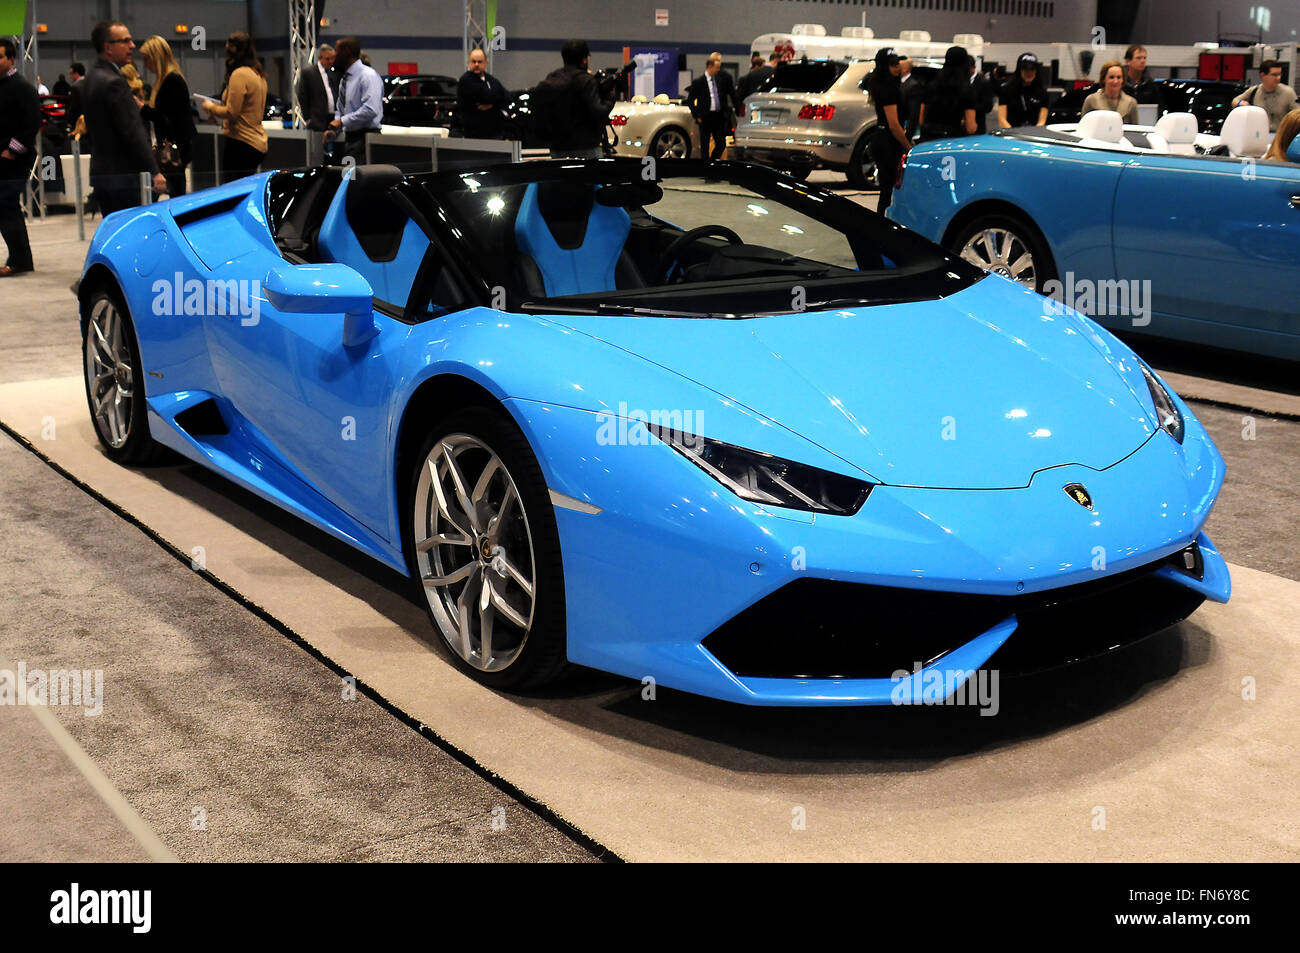 The Chicago Auto Show 2016 at McCormick Place - Press Preview  Featuring: Lamborghini Huracan Spyder Where: Chicago, Illinois, United States When: 11 Feb 2016 Stock Photo